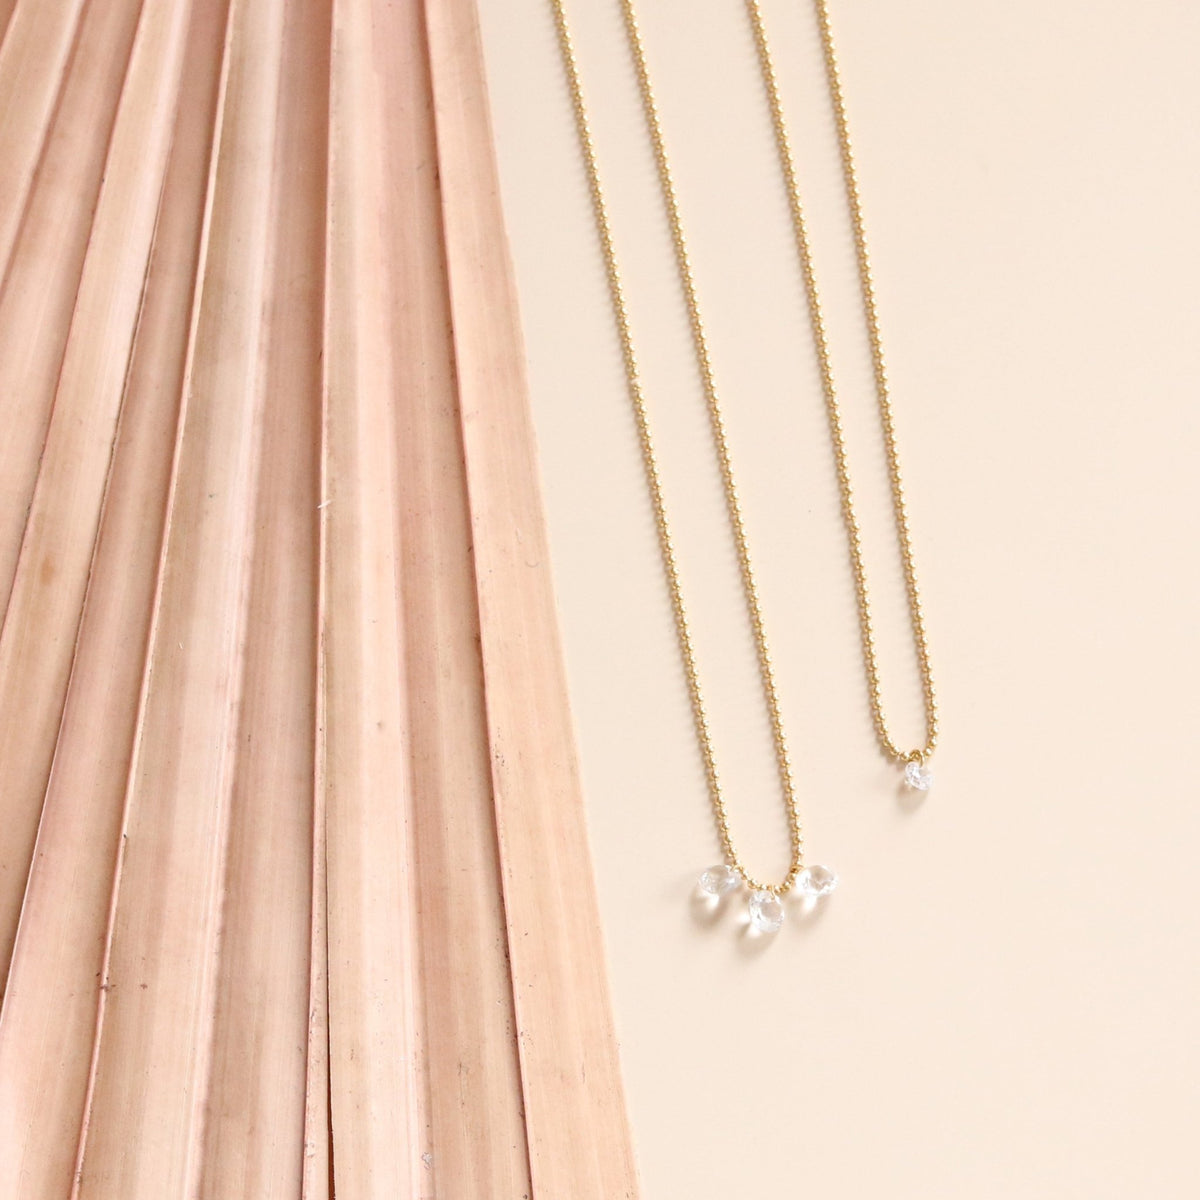 DAINTY RADIANT TRIO NECKLACE - CUBIC ZIRCONIA &amp; GOLD - SO PRETTY CARA COTTER